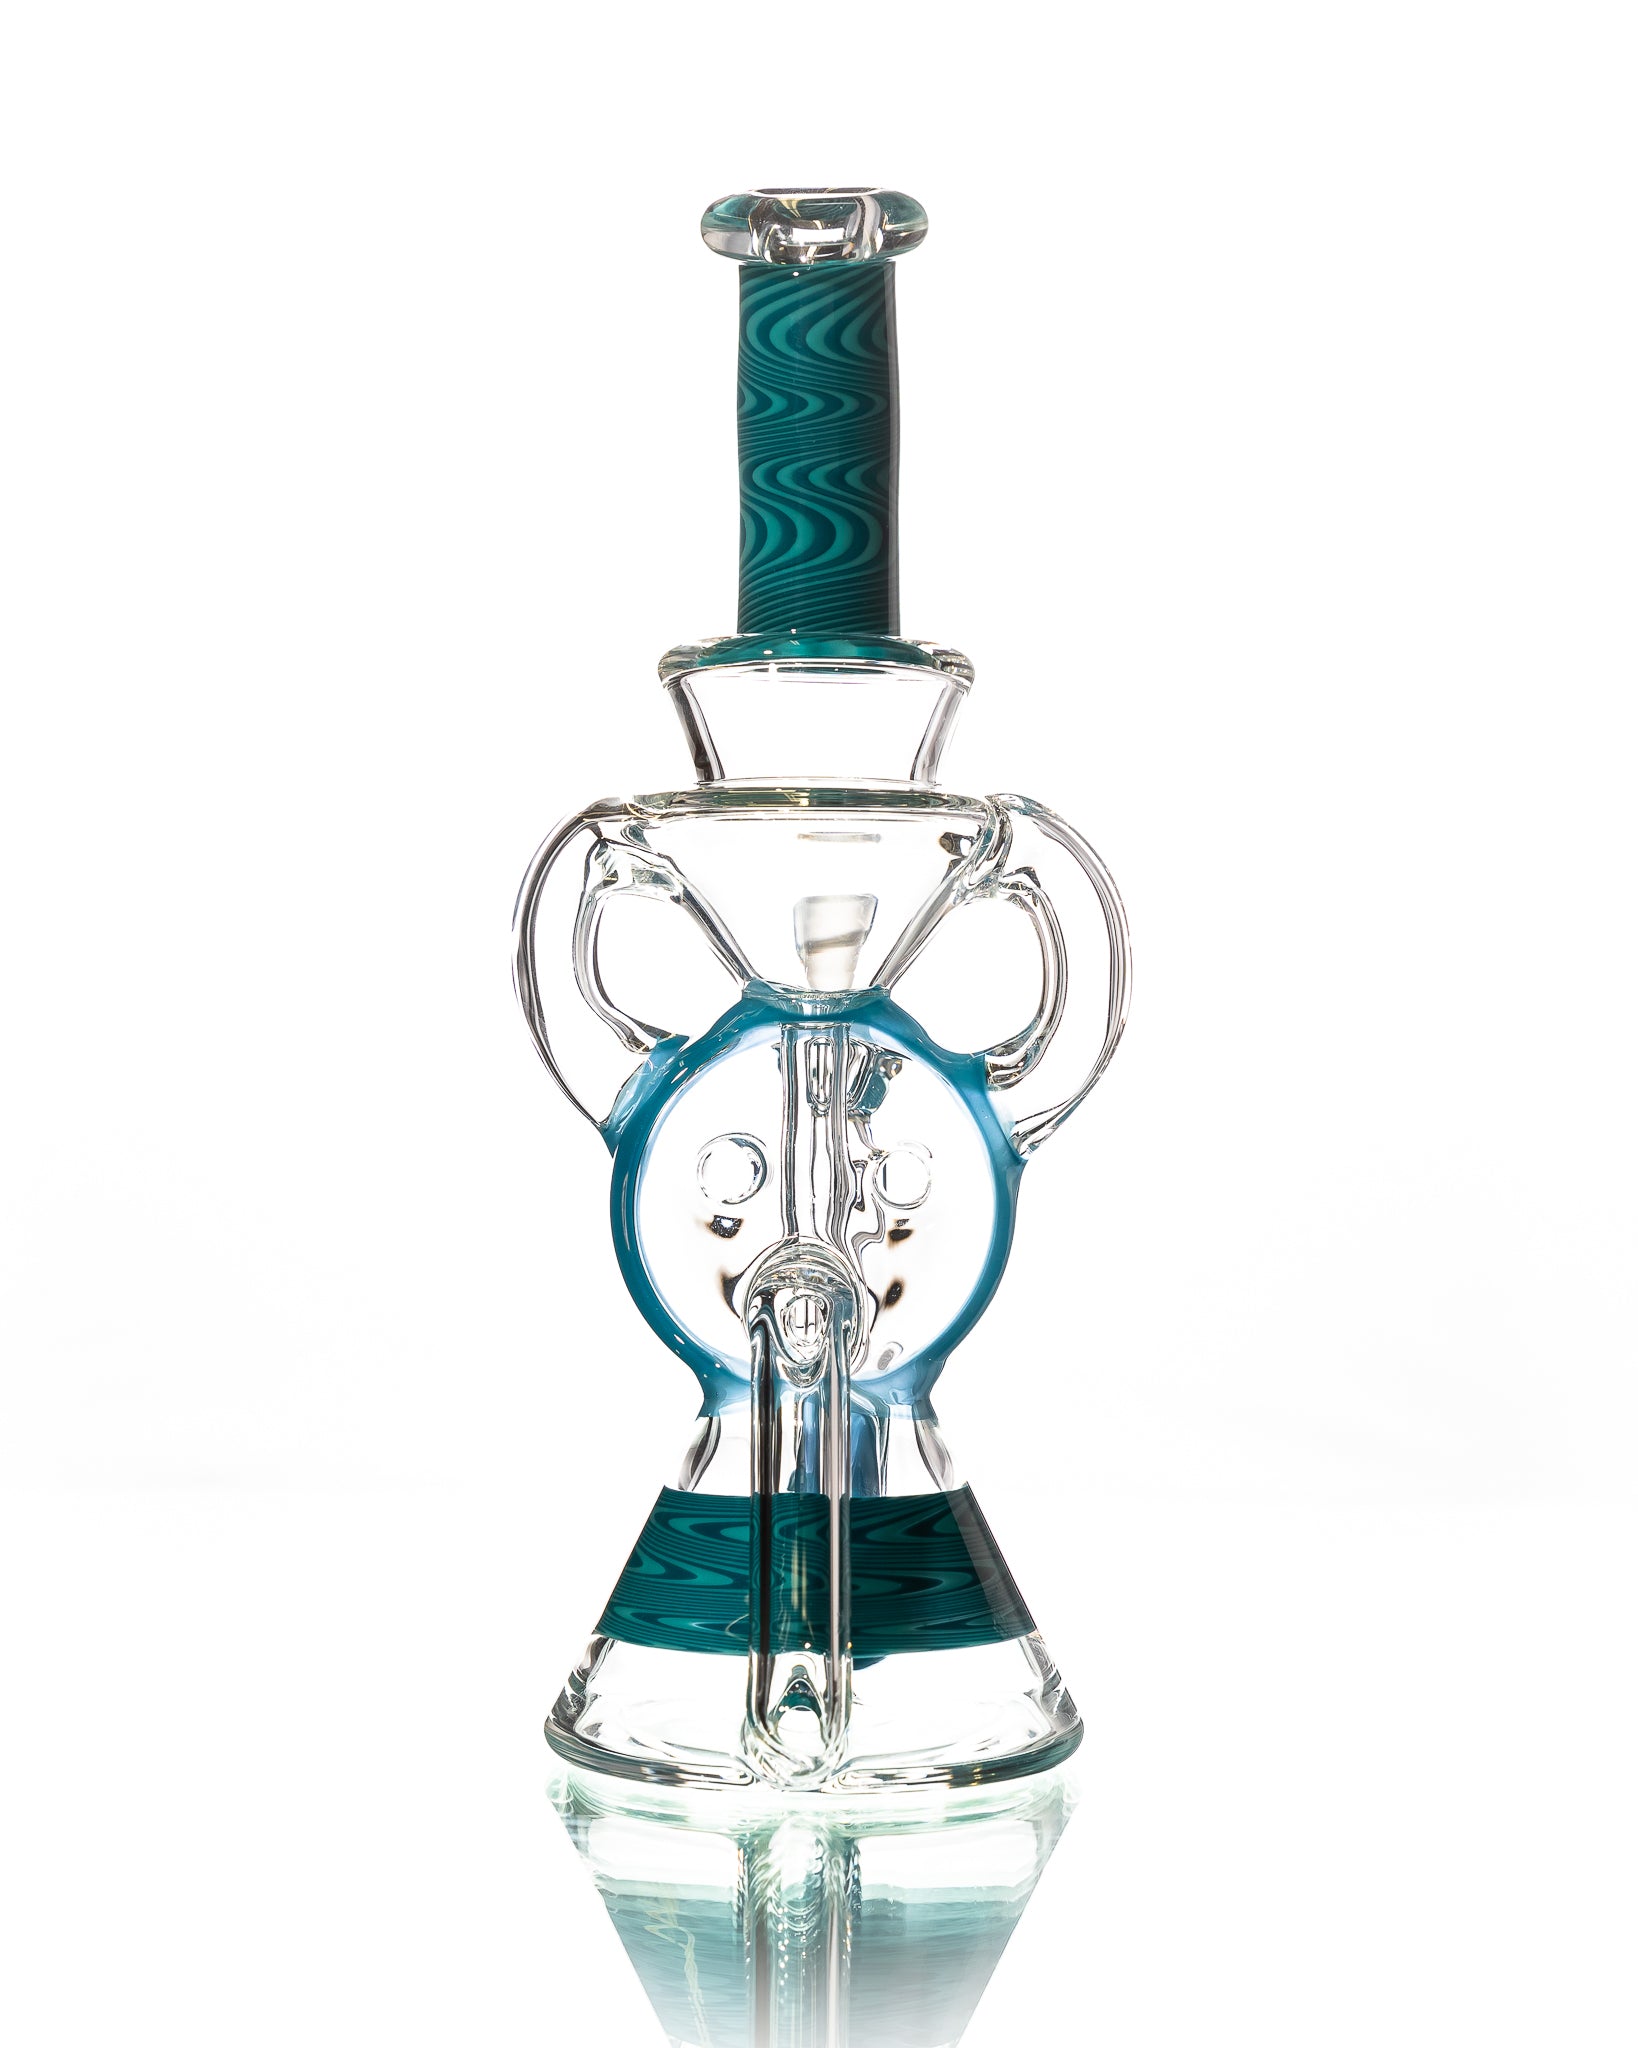 A-1 Glass Recyclers